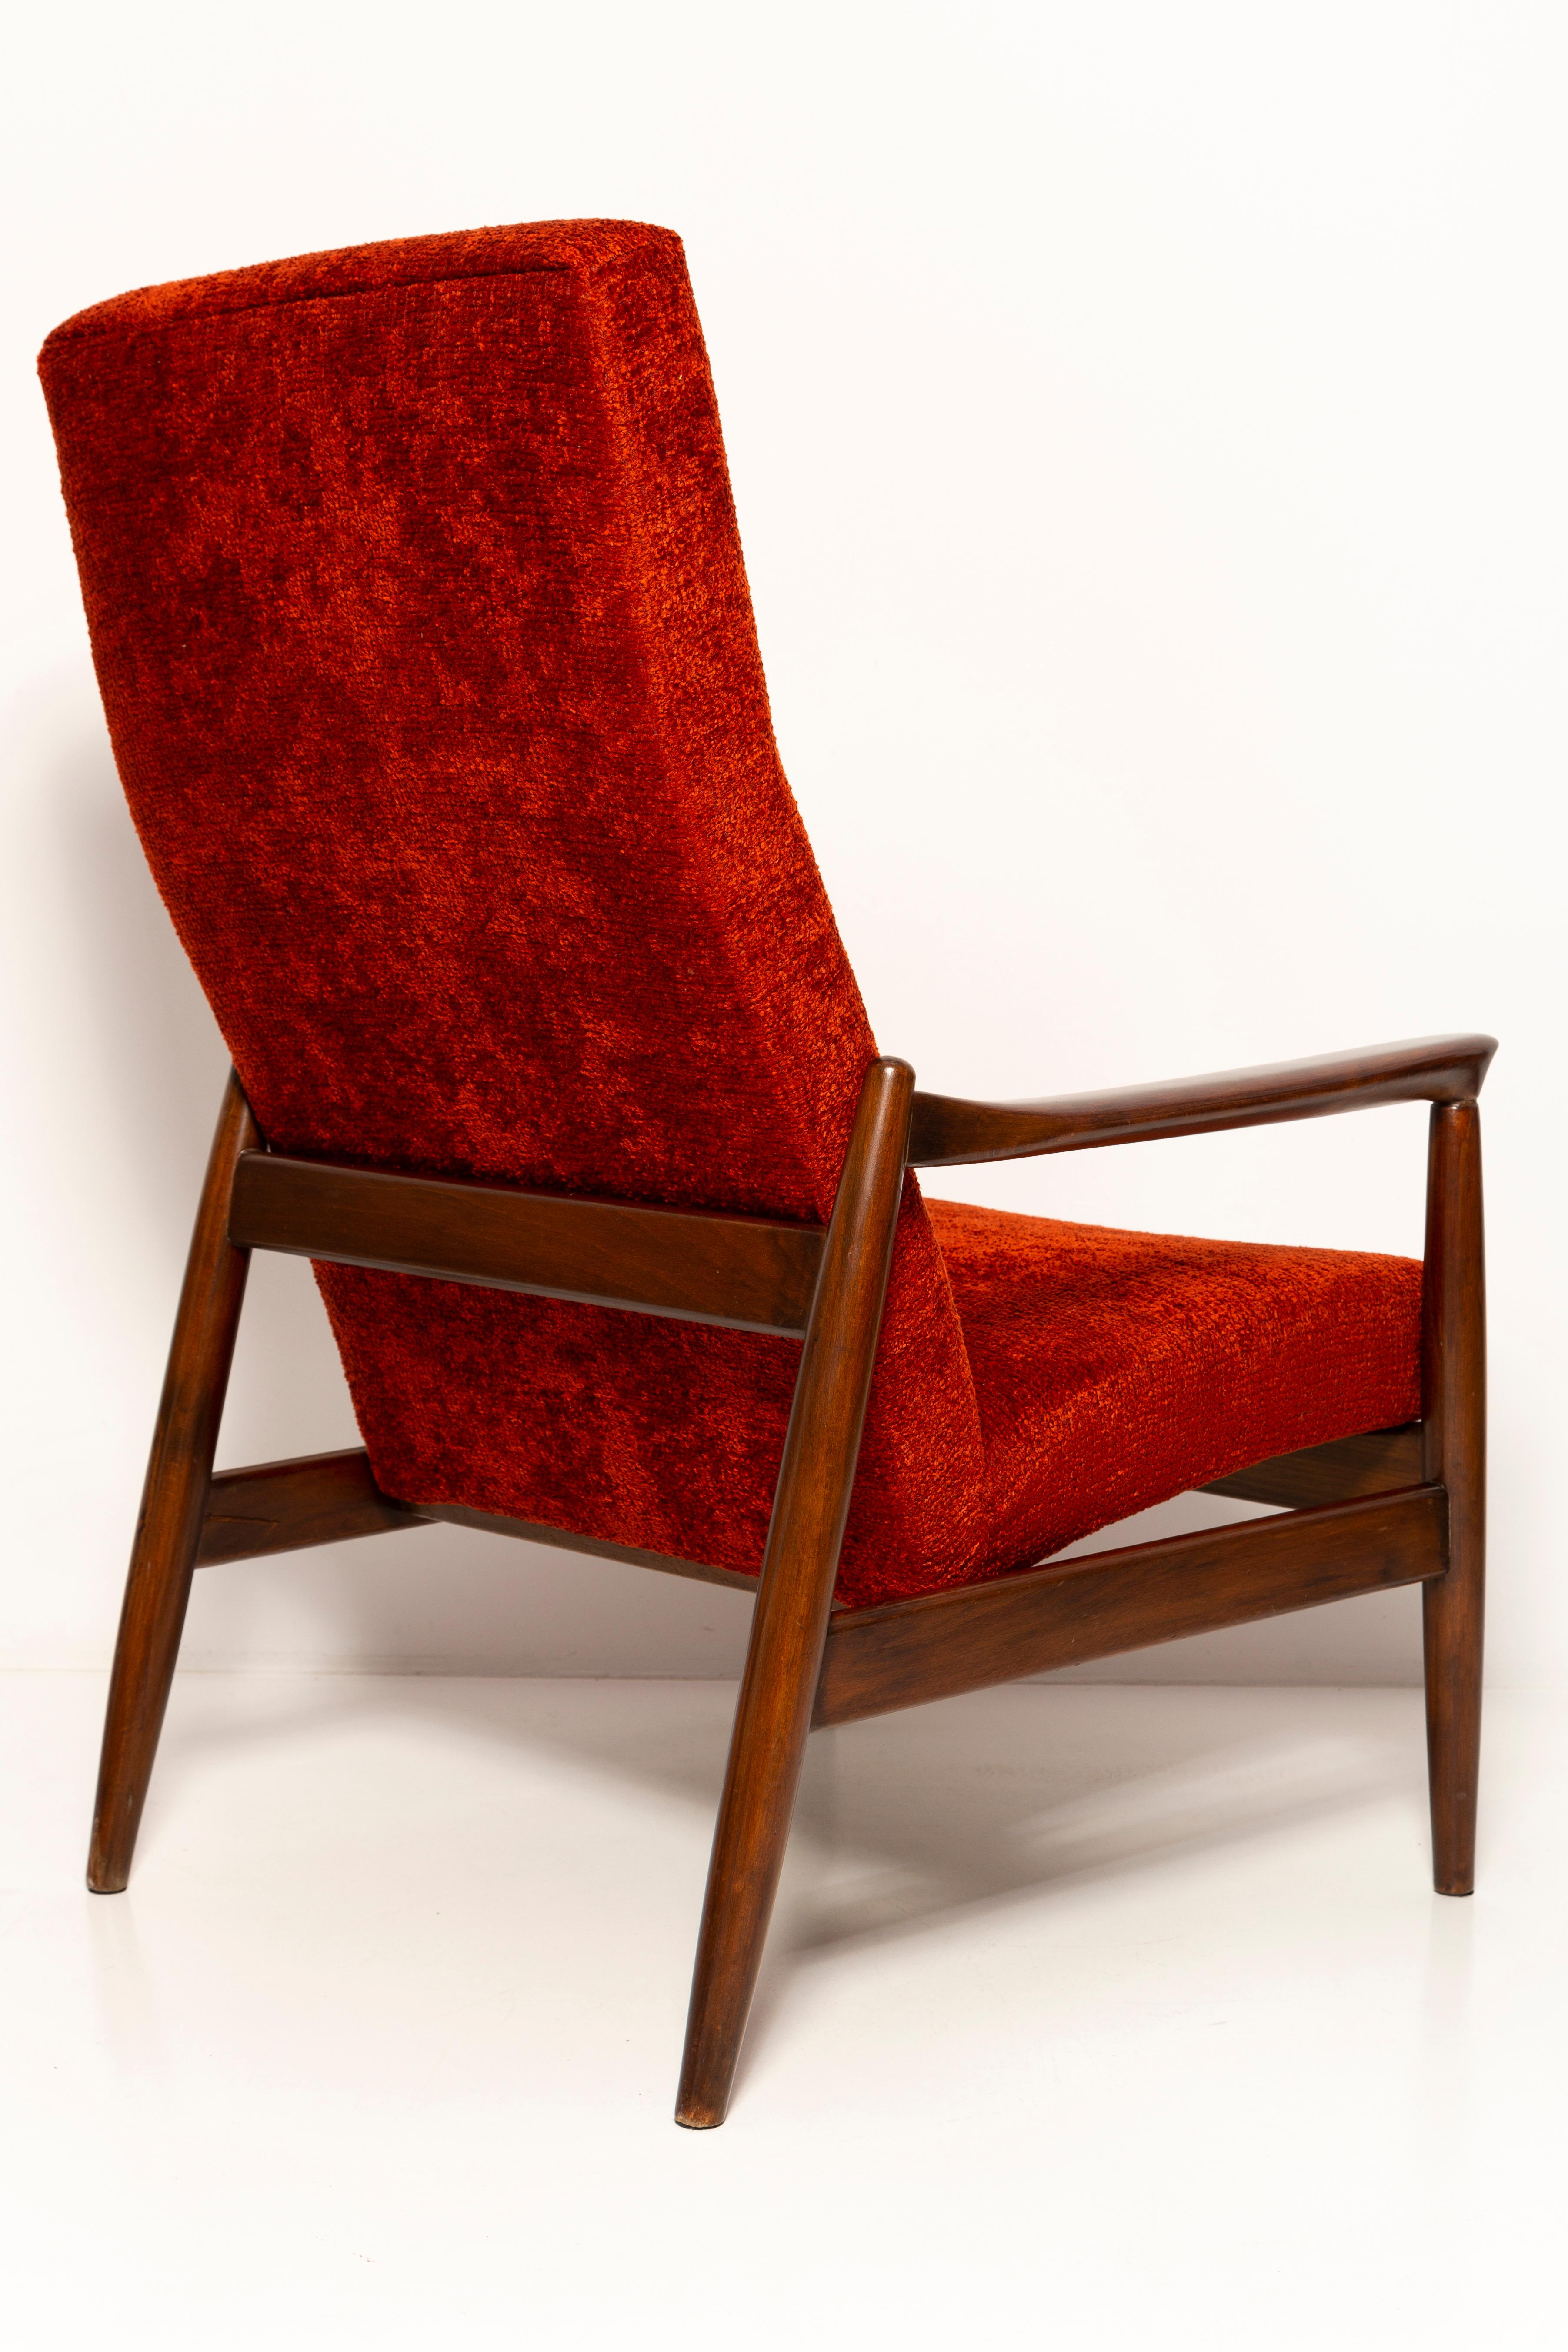 Fabric Mid Century Burgundy Red Wine Armchair GFM-64 High, Edmund Homa, Europe, 1960s For Sale